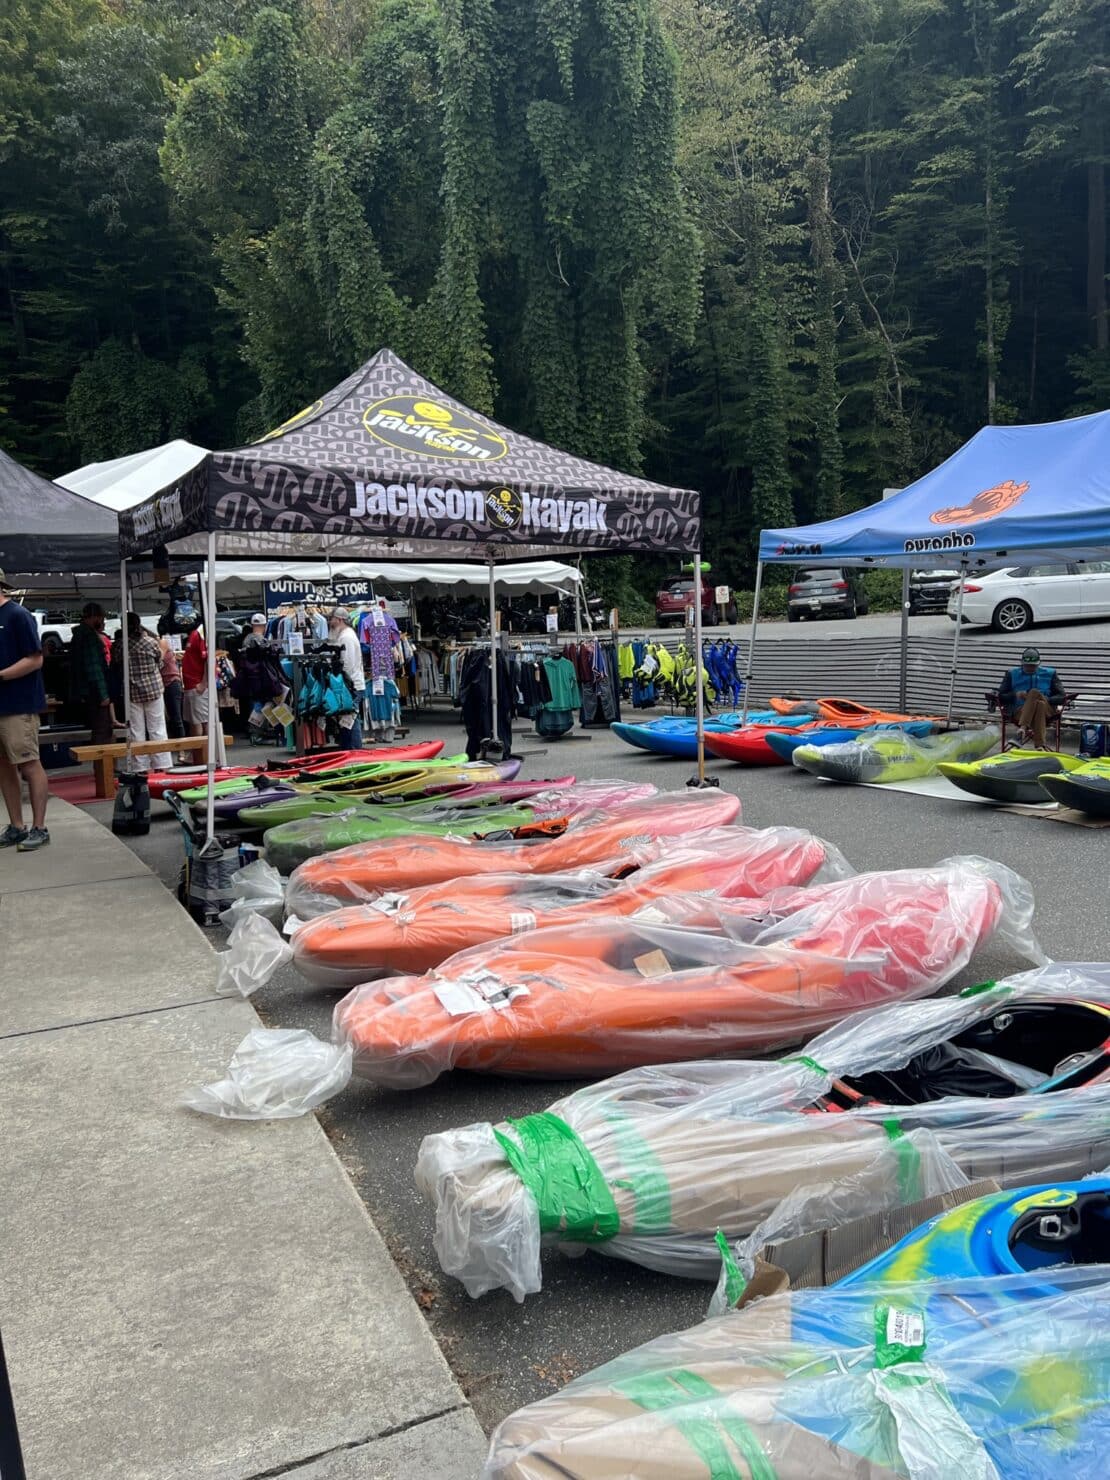 A shot of a bunch of kayaks being offered by vendors at Guest Appreciation Festival at Nantahala Outdoor Center